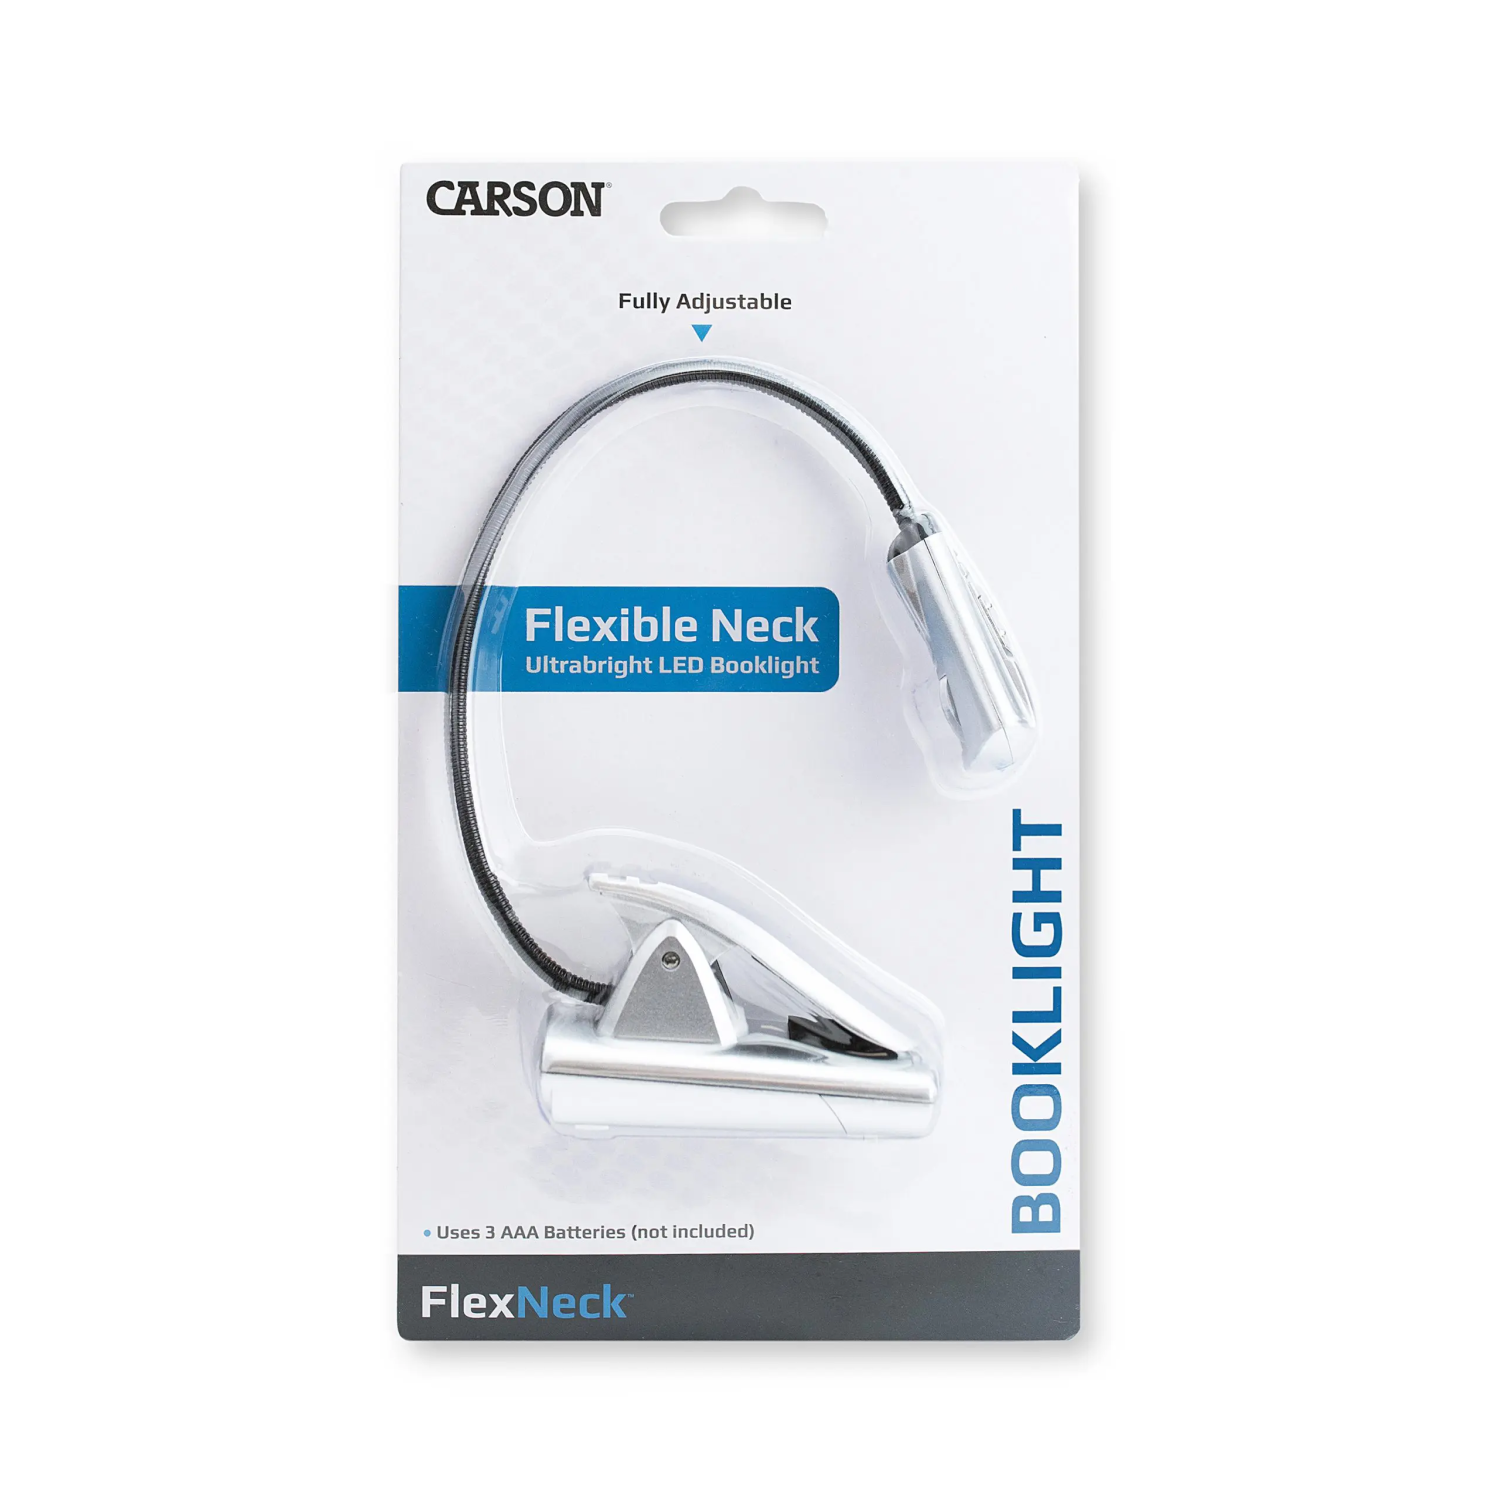 Image of the packaging that the FlexNeck LED Book Light comes in.